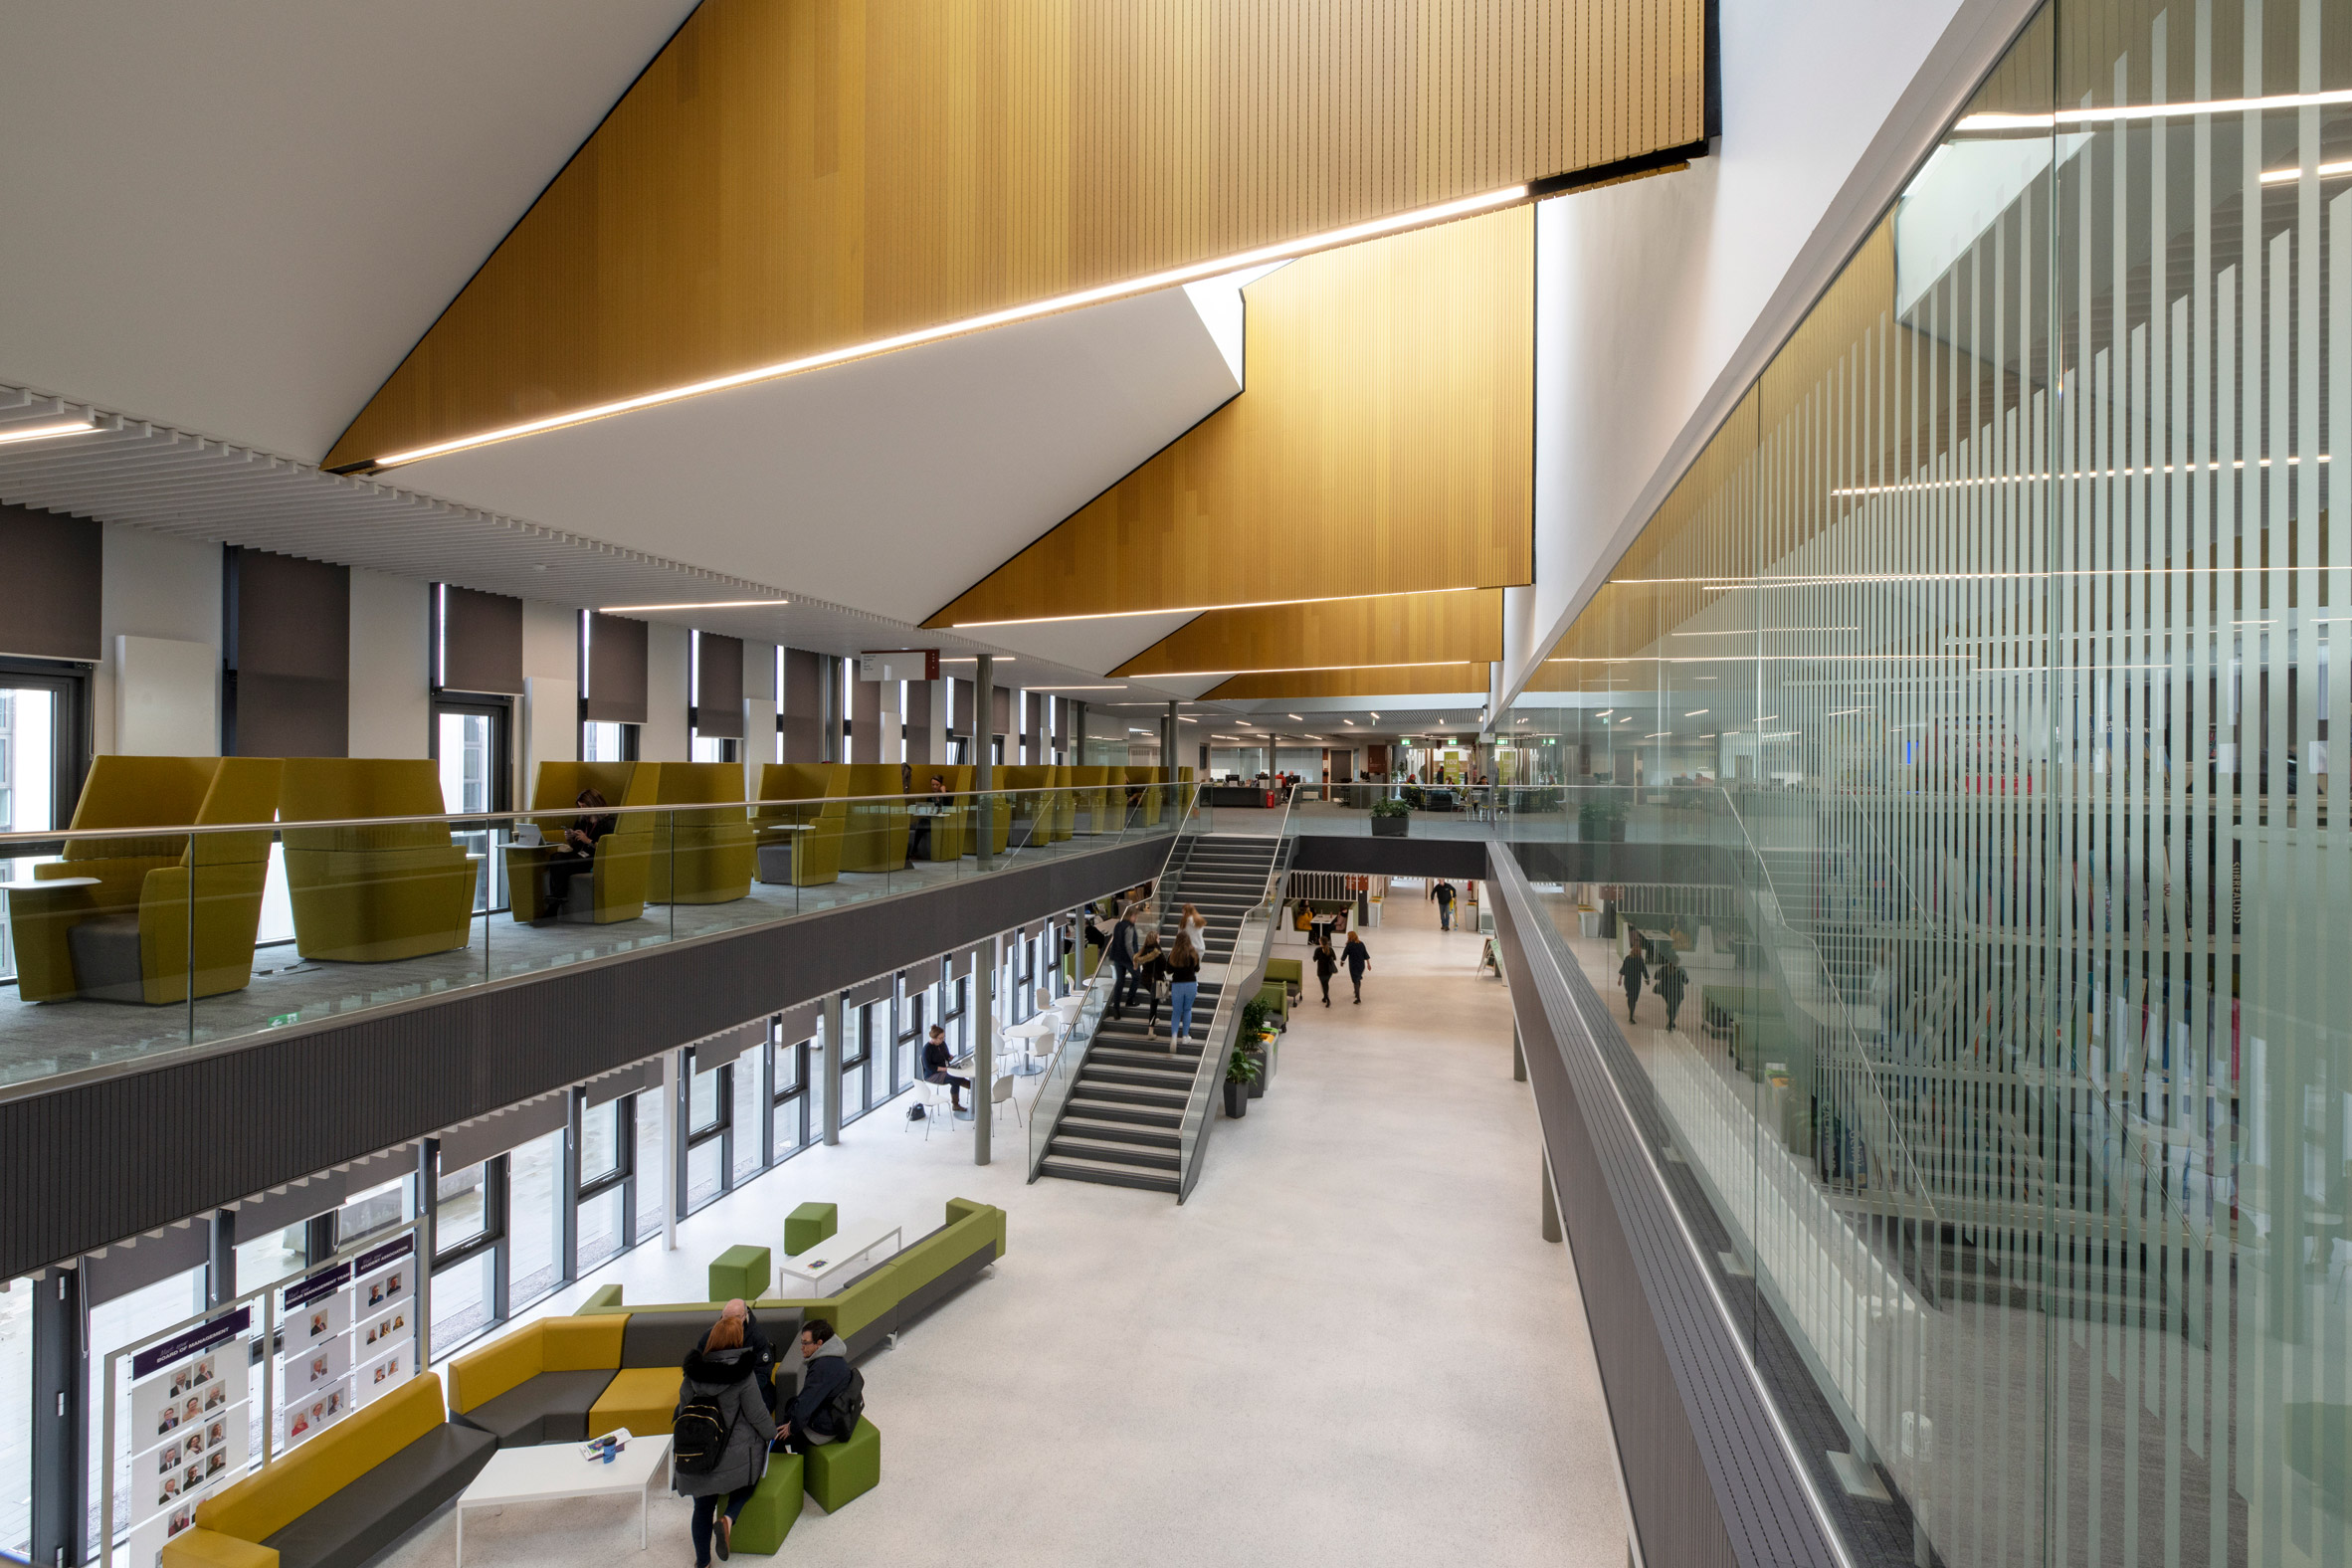 Forth Valley College – Falkirk Campus, by Reiach and Hall Architects, Scotland